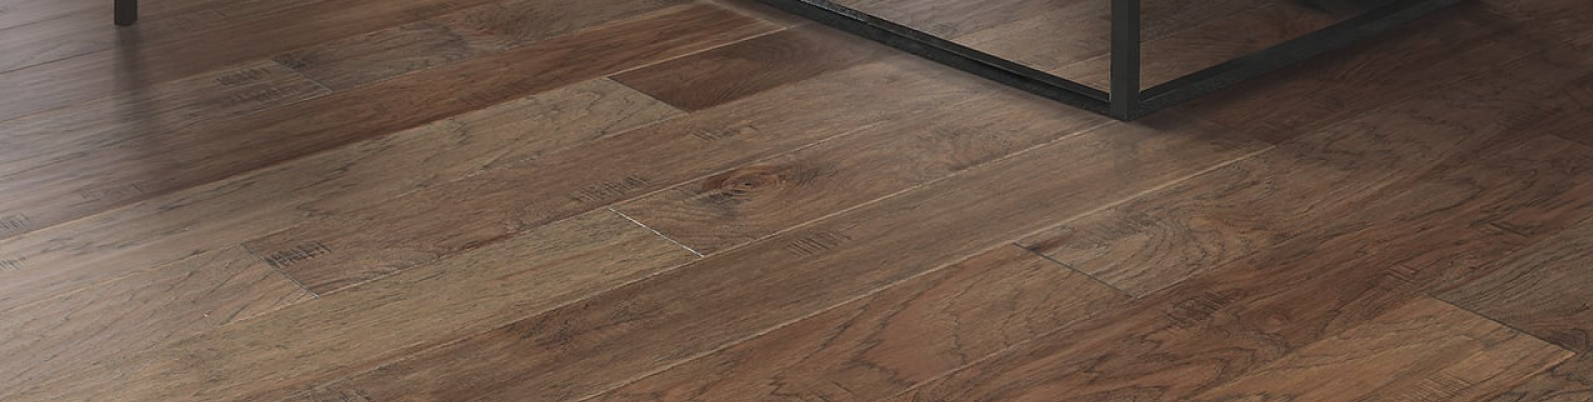 Buy now and pay over time with Philadelphia Flooring Solutions in Philadelphia, PA and Cherry Hill NJ